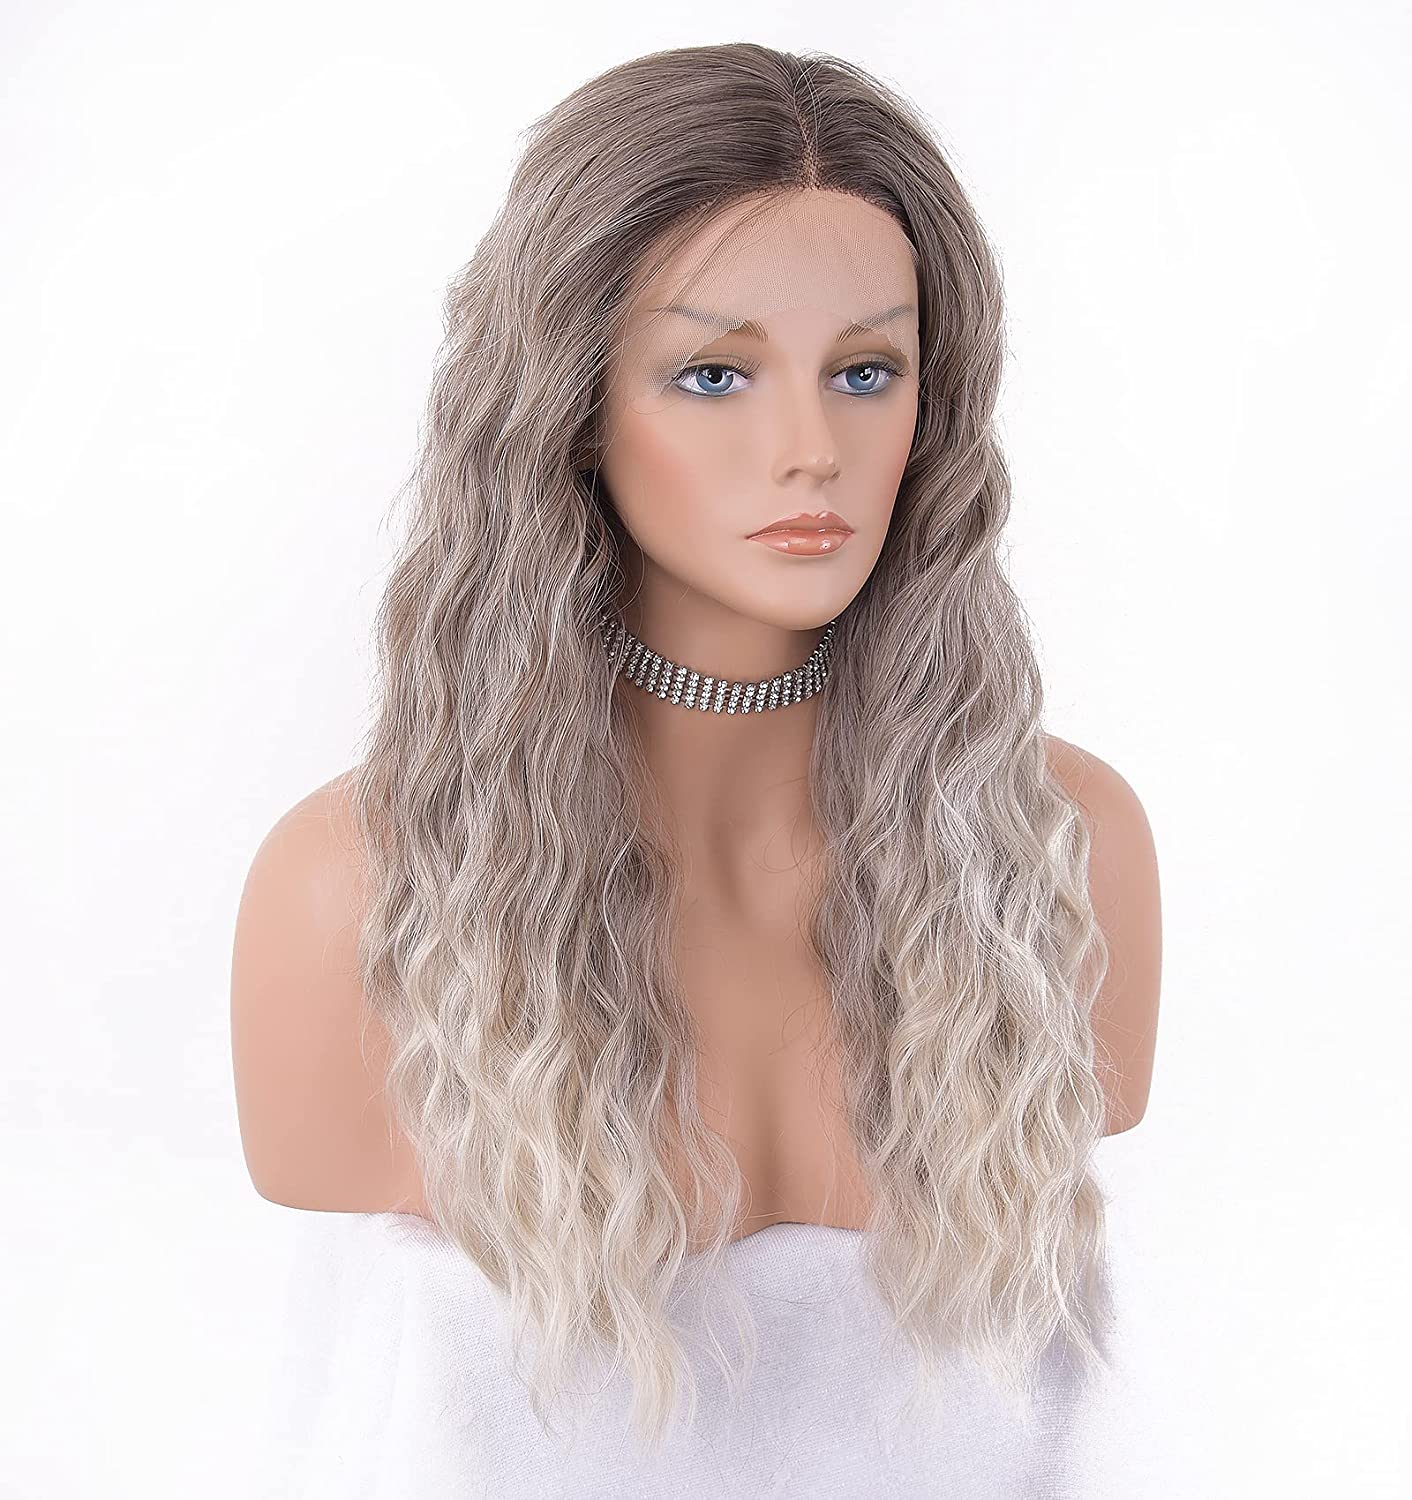 curly lace front wig,dirty blonde wig,ombre blonde wig,brown wigs for women,synthetic lace wig,curly wigs for women,long curly wig,synthetic wigs for women,brown hair wig,ombre wigs for women brown lace front wigs,ombre lace wig,blonde lace front wigs,lace front wigs,curly lace wig,lace synthetic wigs,curly synthetic wigs,blonde curly wig,ombre lace front wig,blonde ombre wig,b